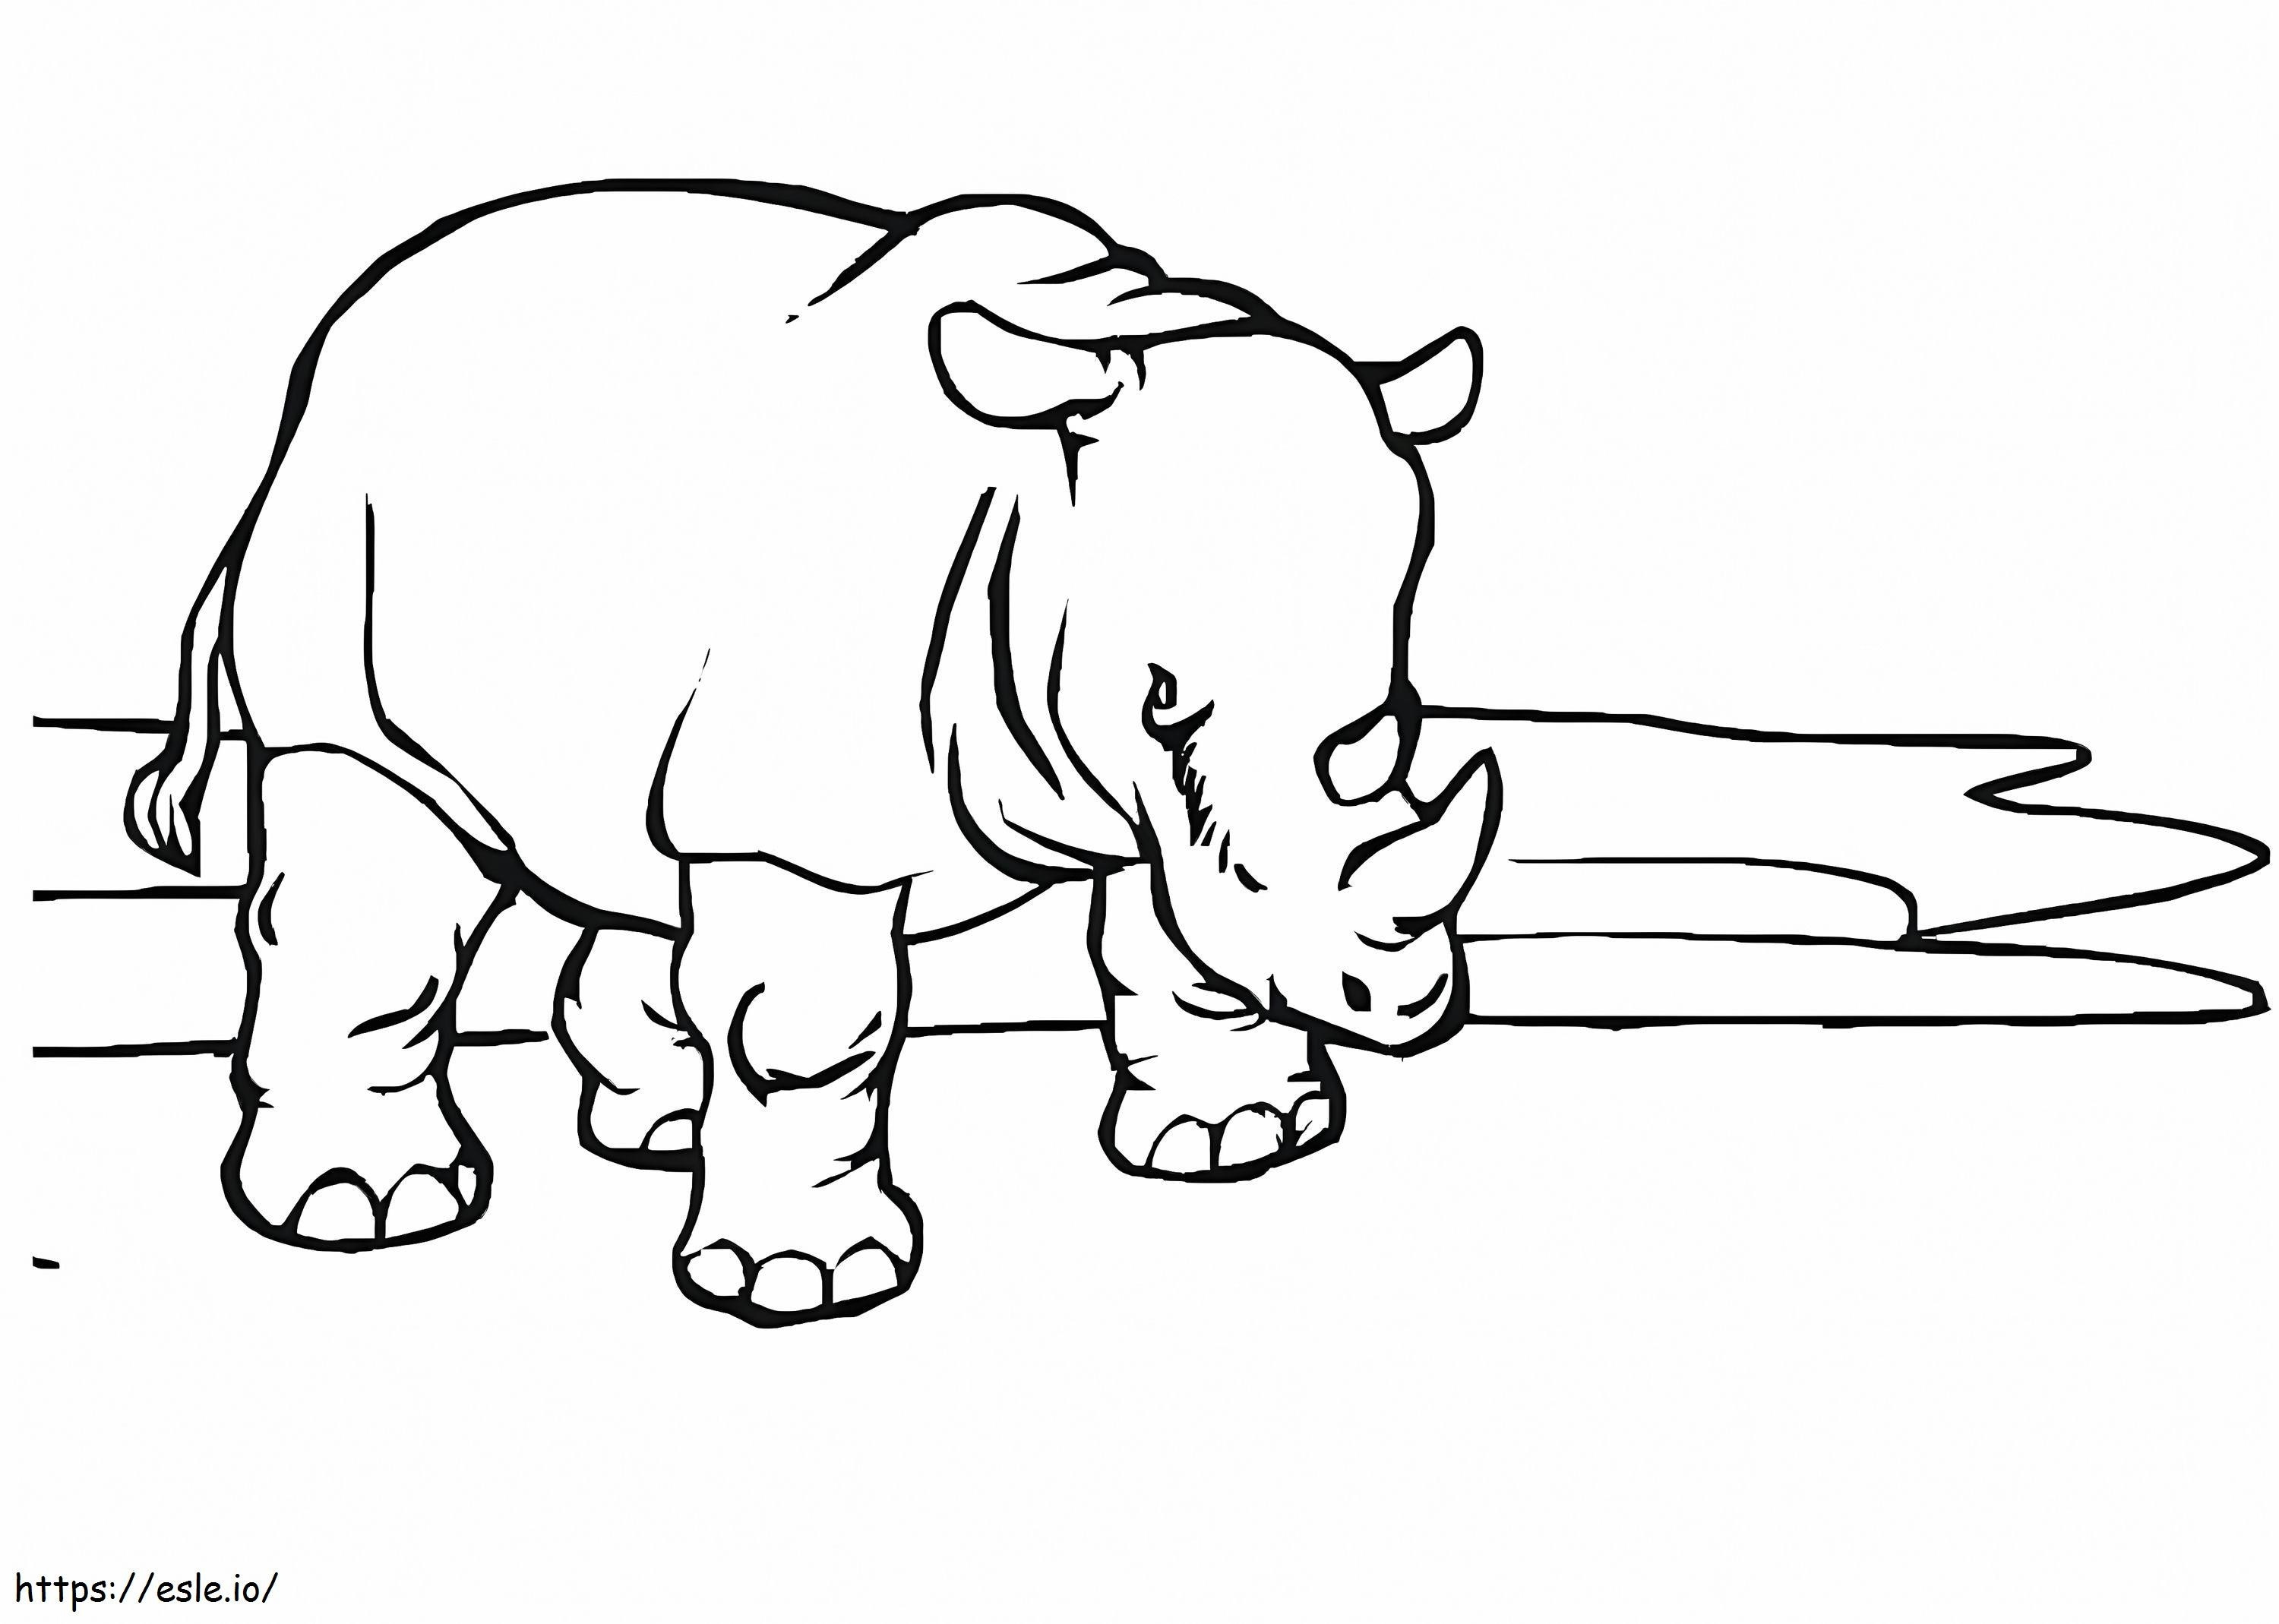 Rhino Face coloring page